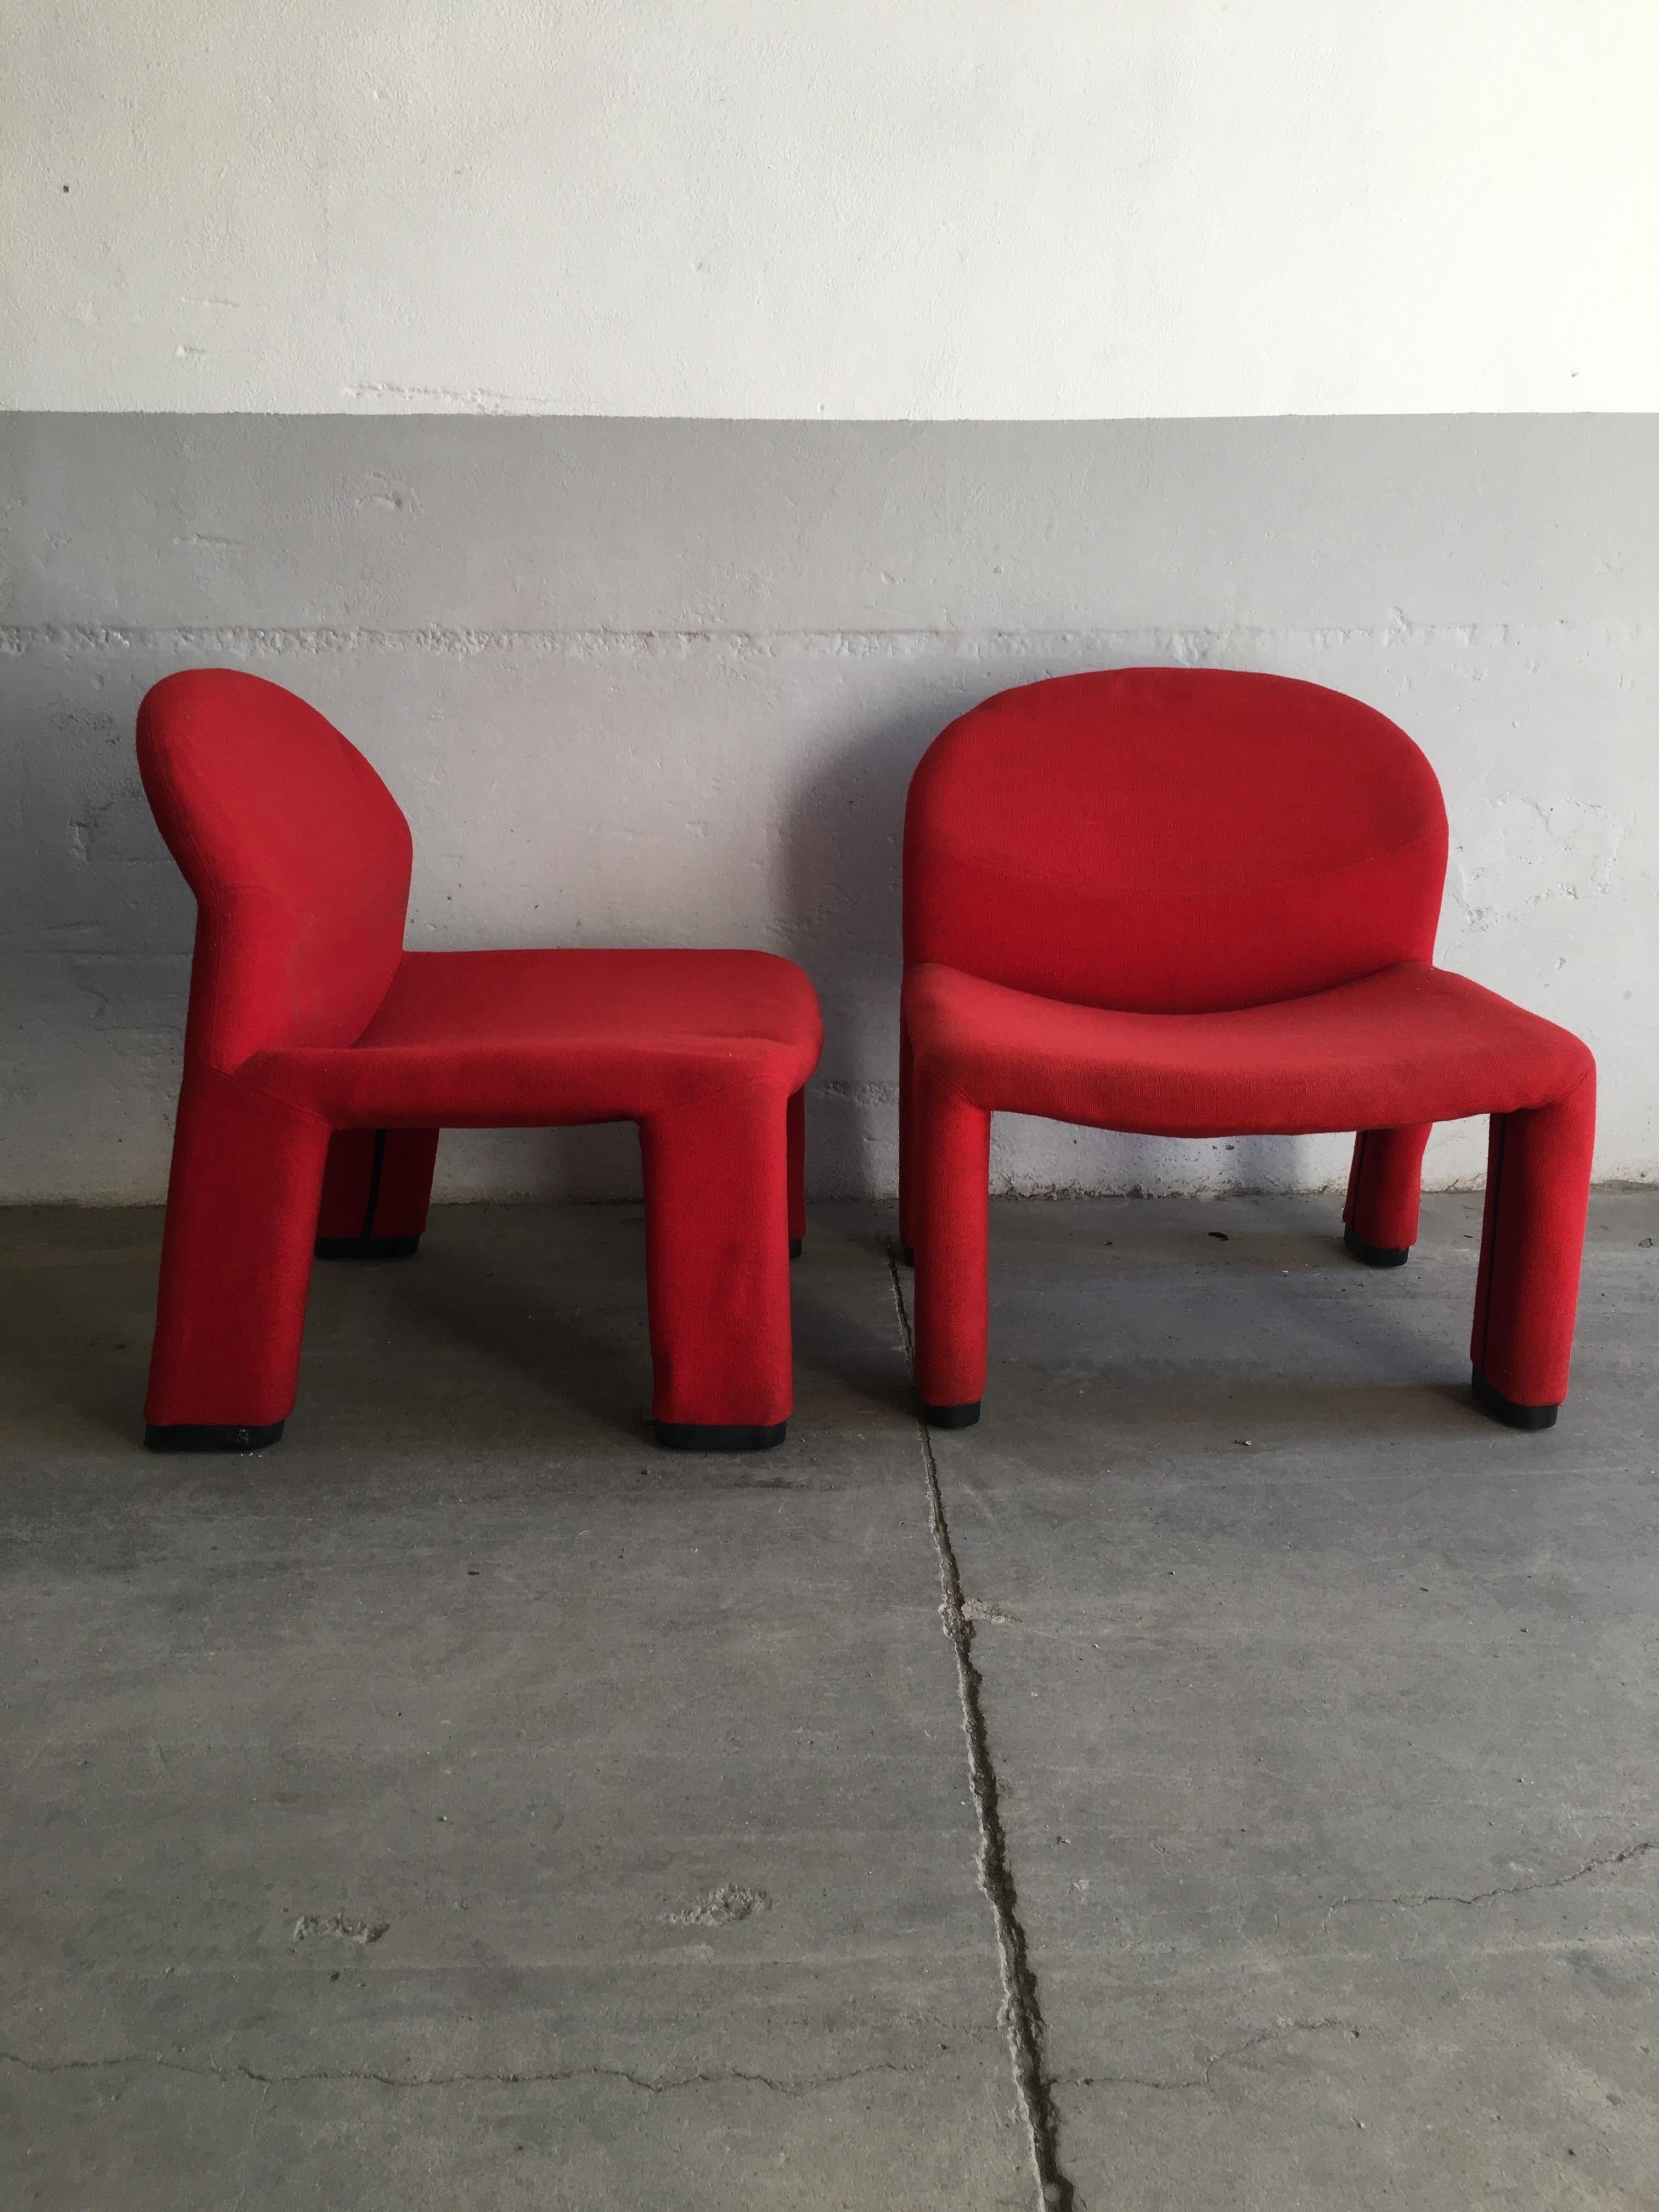 Mid-Century Modern pair of Italian armchairs in the style of Pierre Paulin and Anonima Castelli with original red fabric from 1980s.